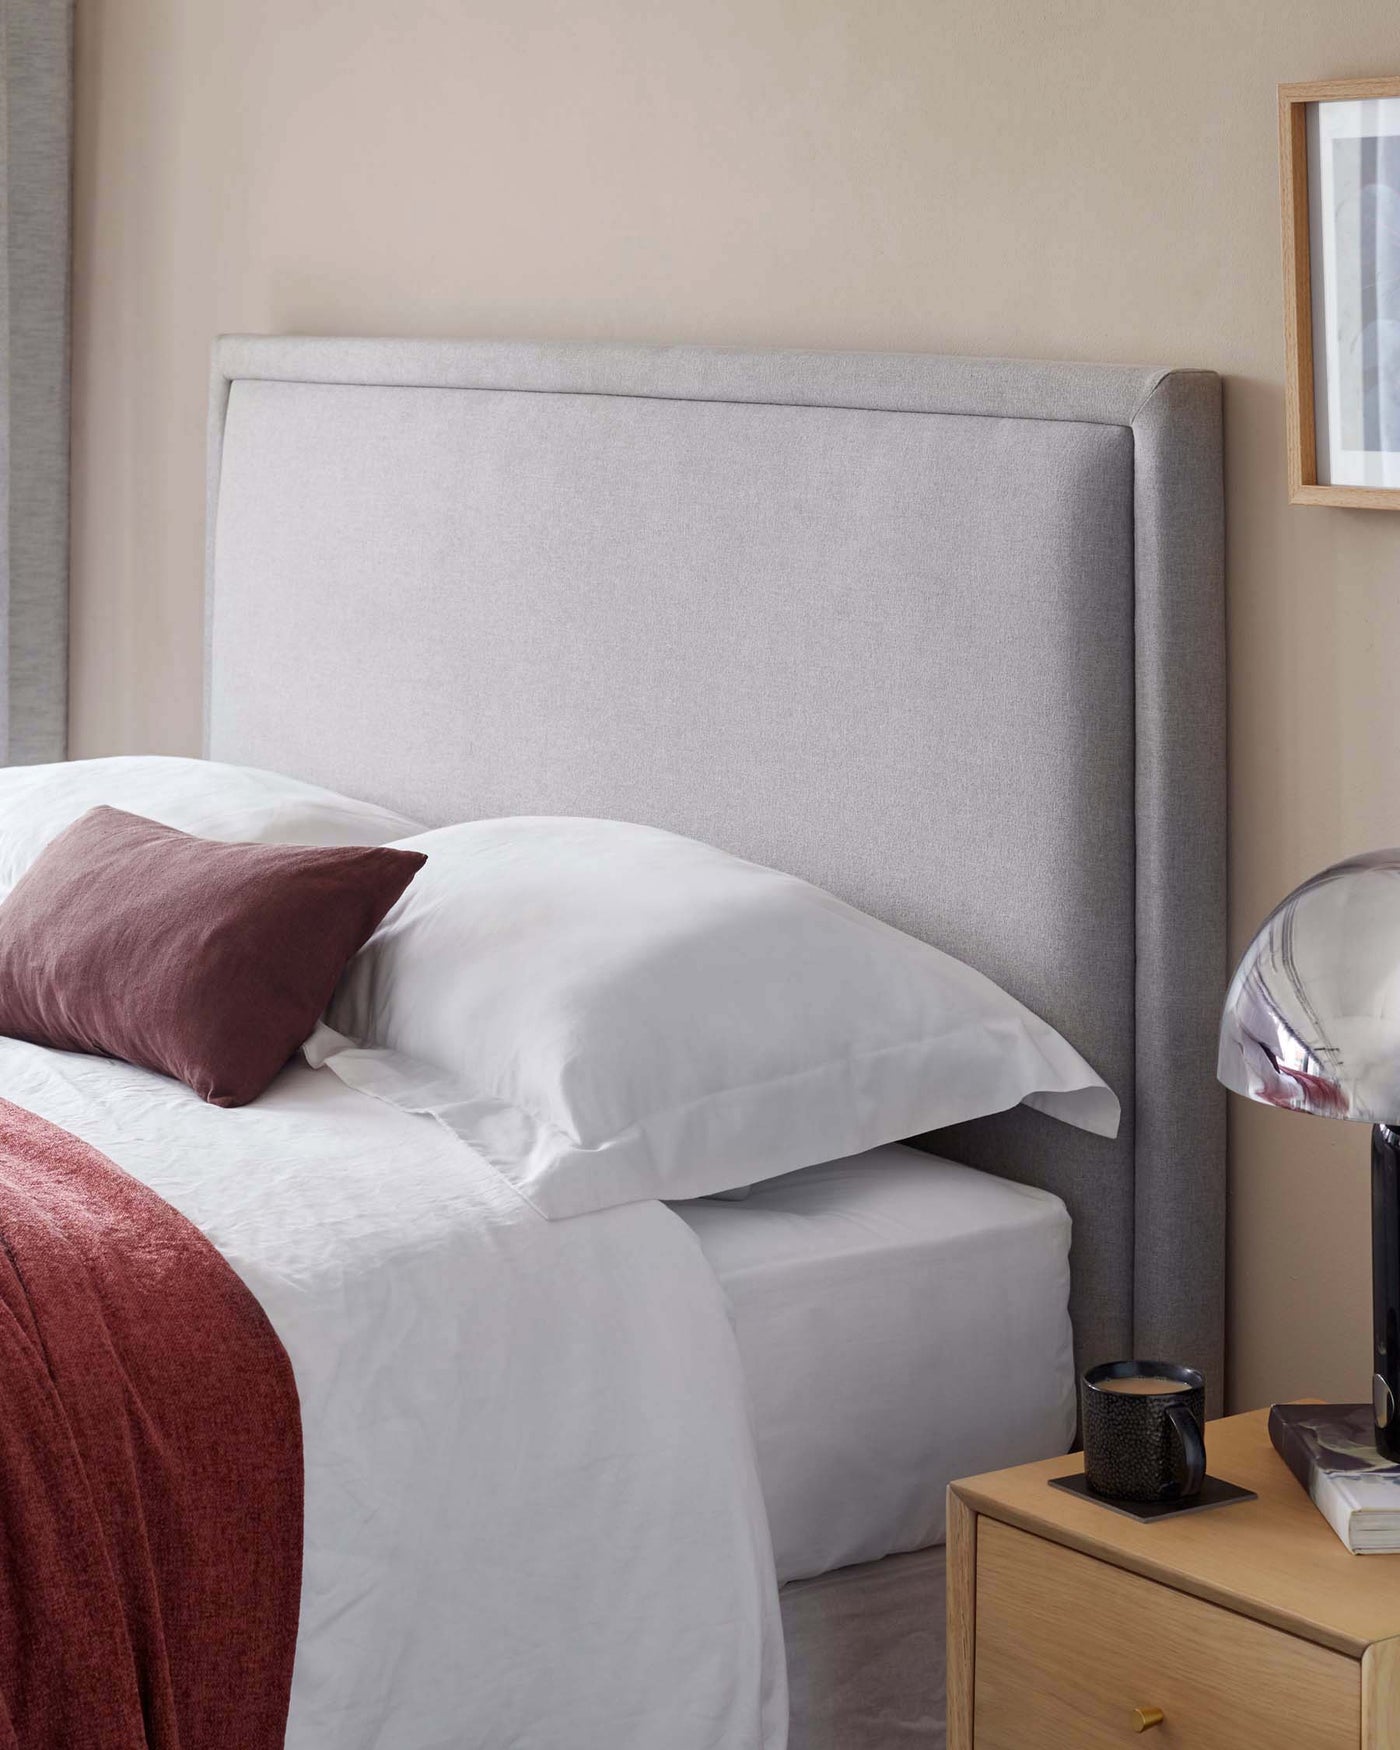 Contemporary styled bedroom featuring a light grey upholstered headboard with clean lines, a natural wood bedside table with a single drawer and a slender metal handle, paired with a modern spherical metal table lamp on top. The bed is dressed with crisp white linens and accented with a terracotta throw and matching pillow. A simple wooden frame with an abstract print hangs on the wall above the table.